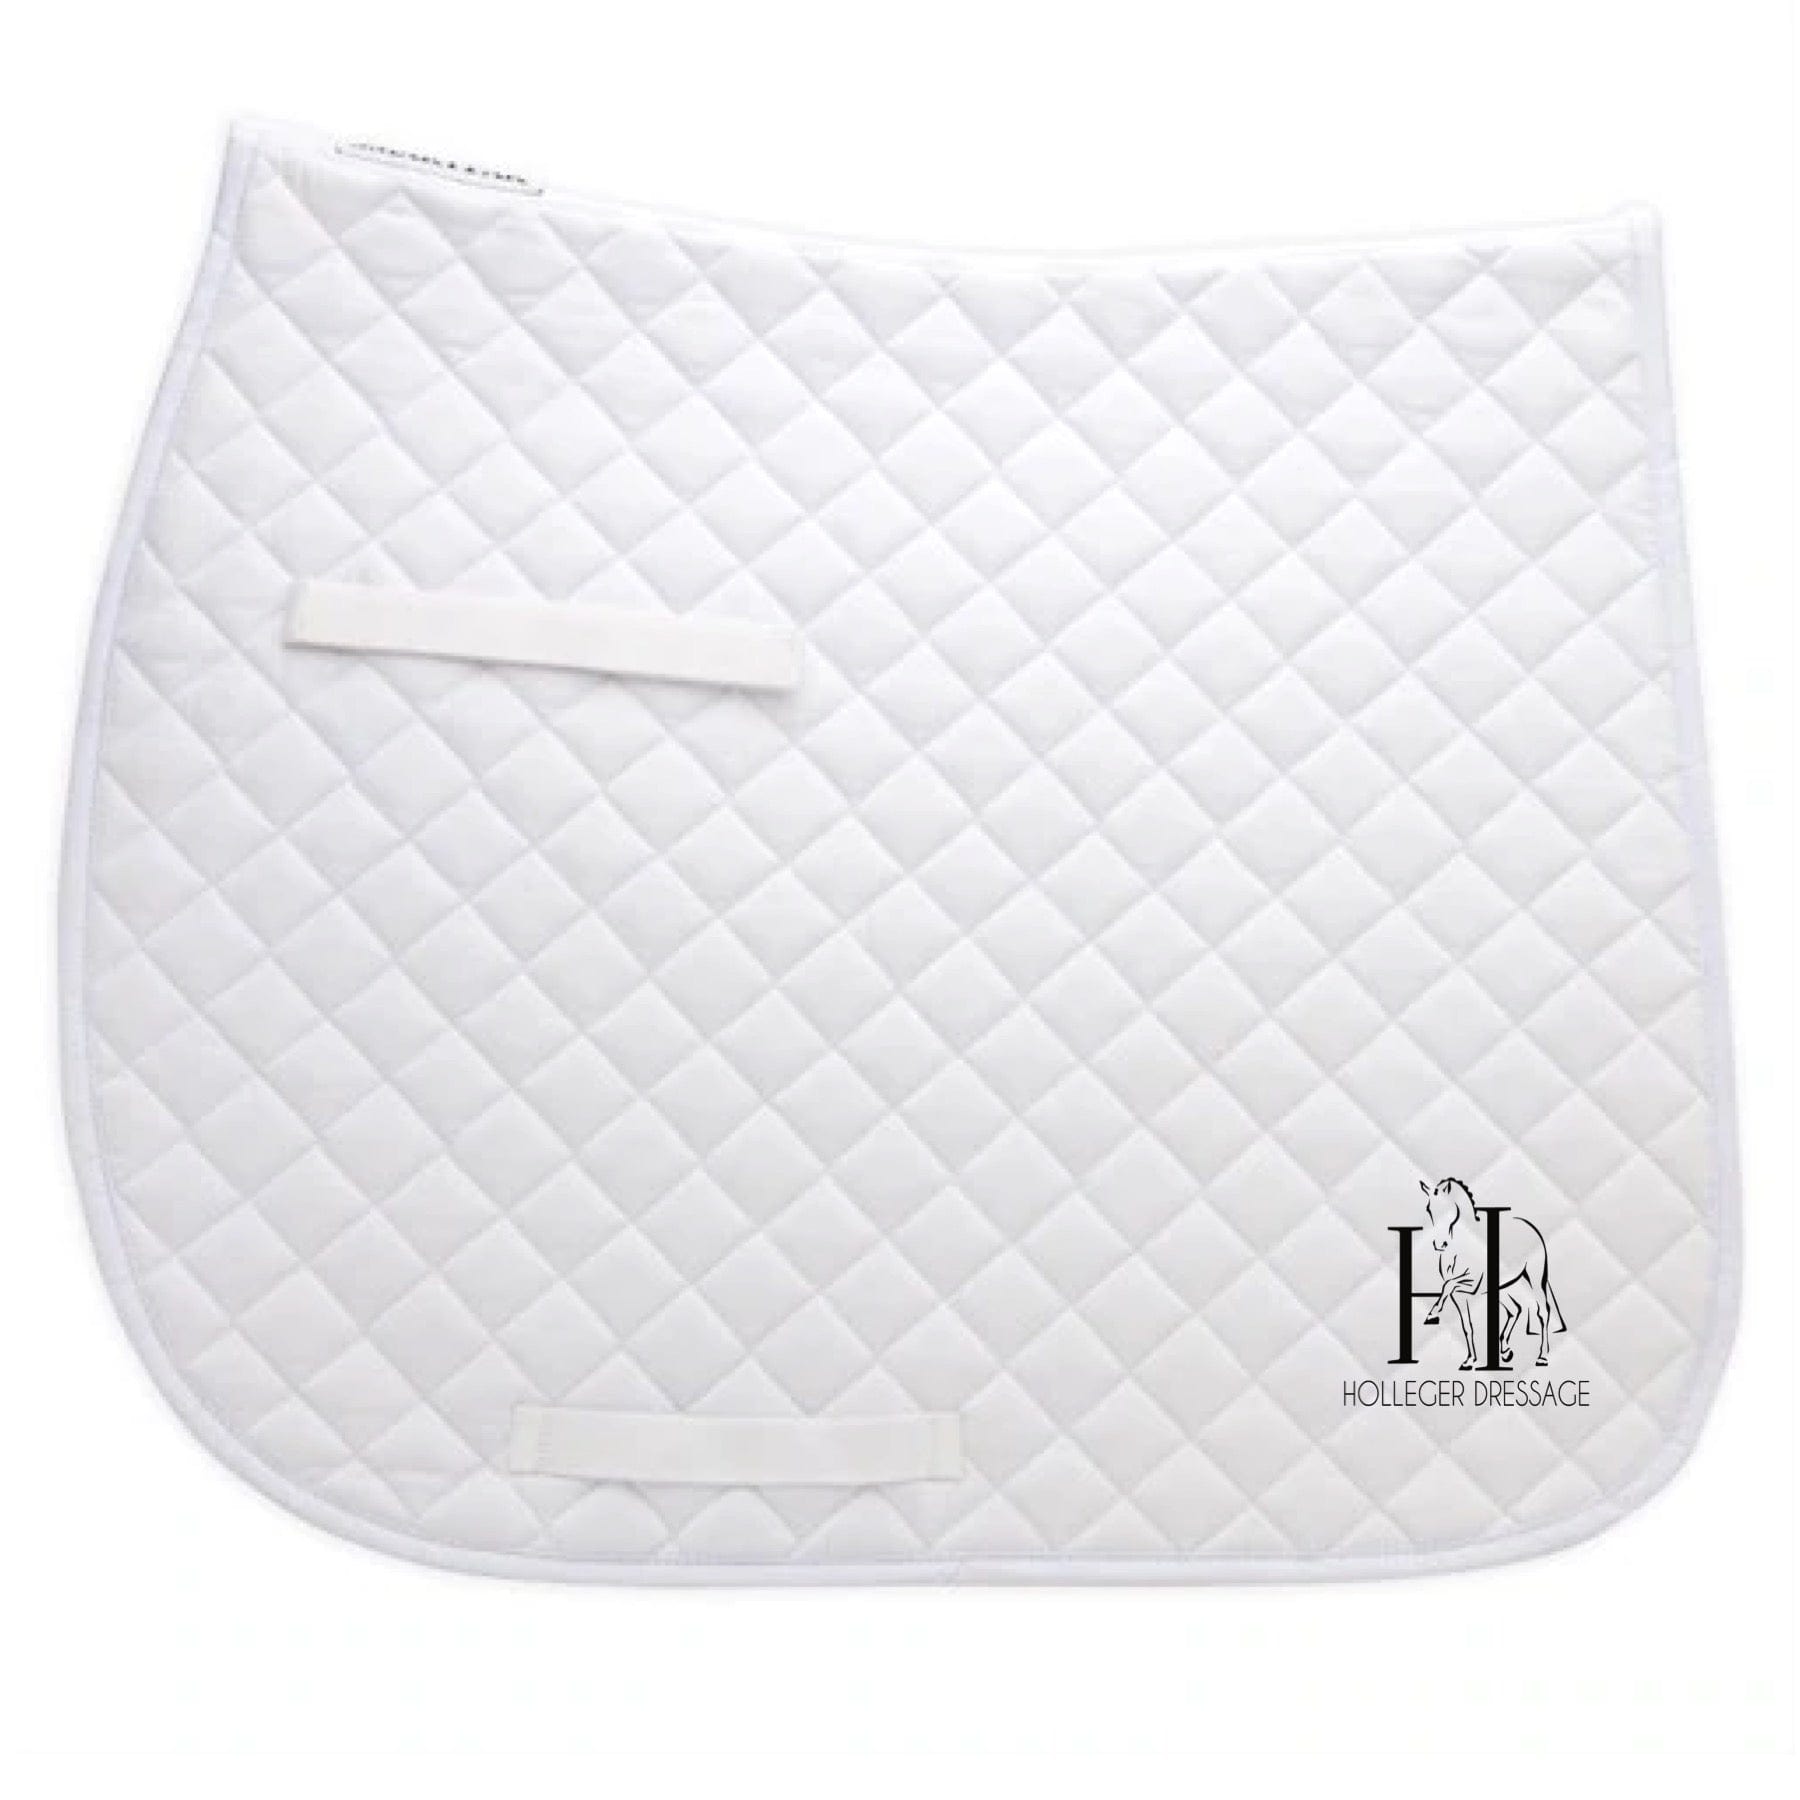 Equestrian Team Apparel Holleger Dressage- Dressage Saddle Pad equestrian team apparel online tack store mobile tack store custom farm apparel custom show stable clothing equestrian lifestyle horse show clothing riding clothes horses equestrian tack store